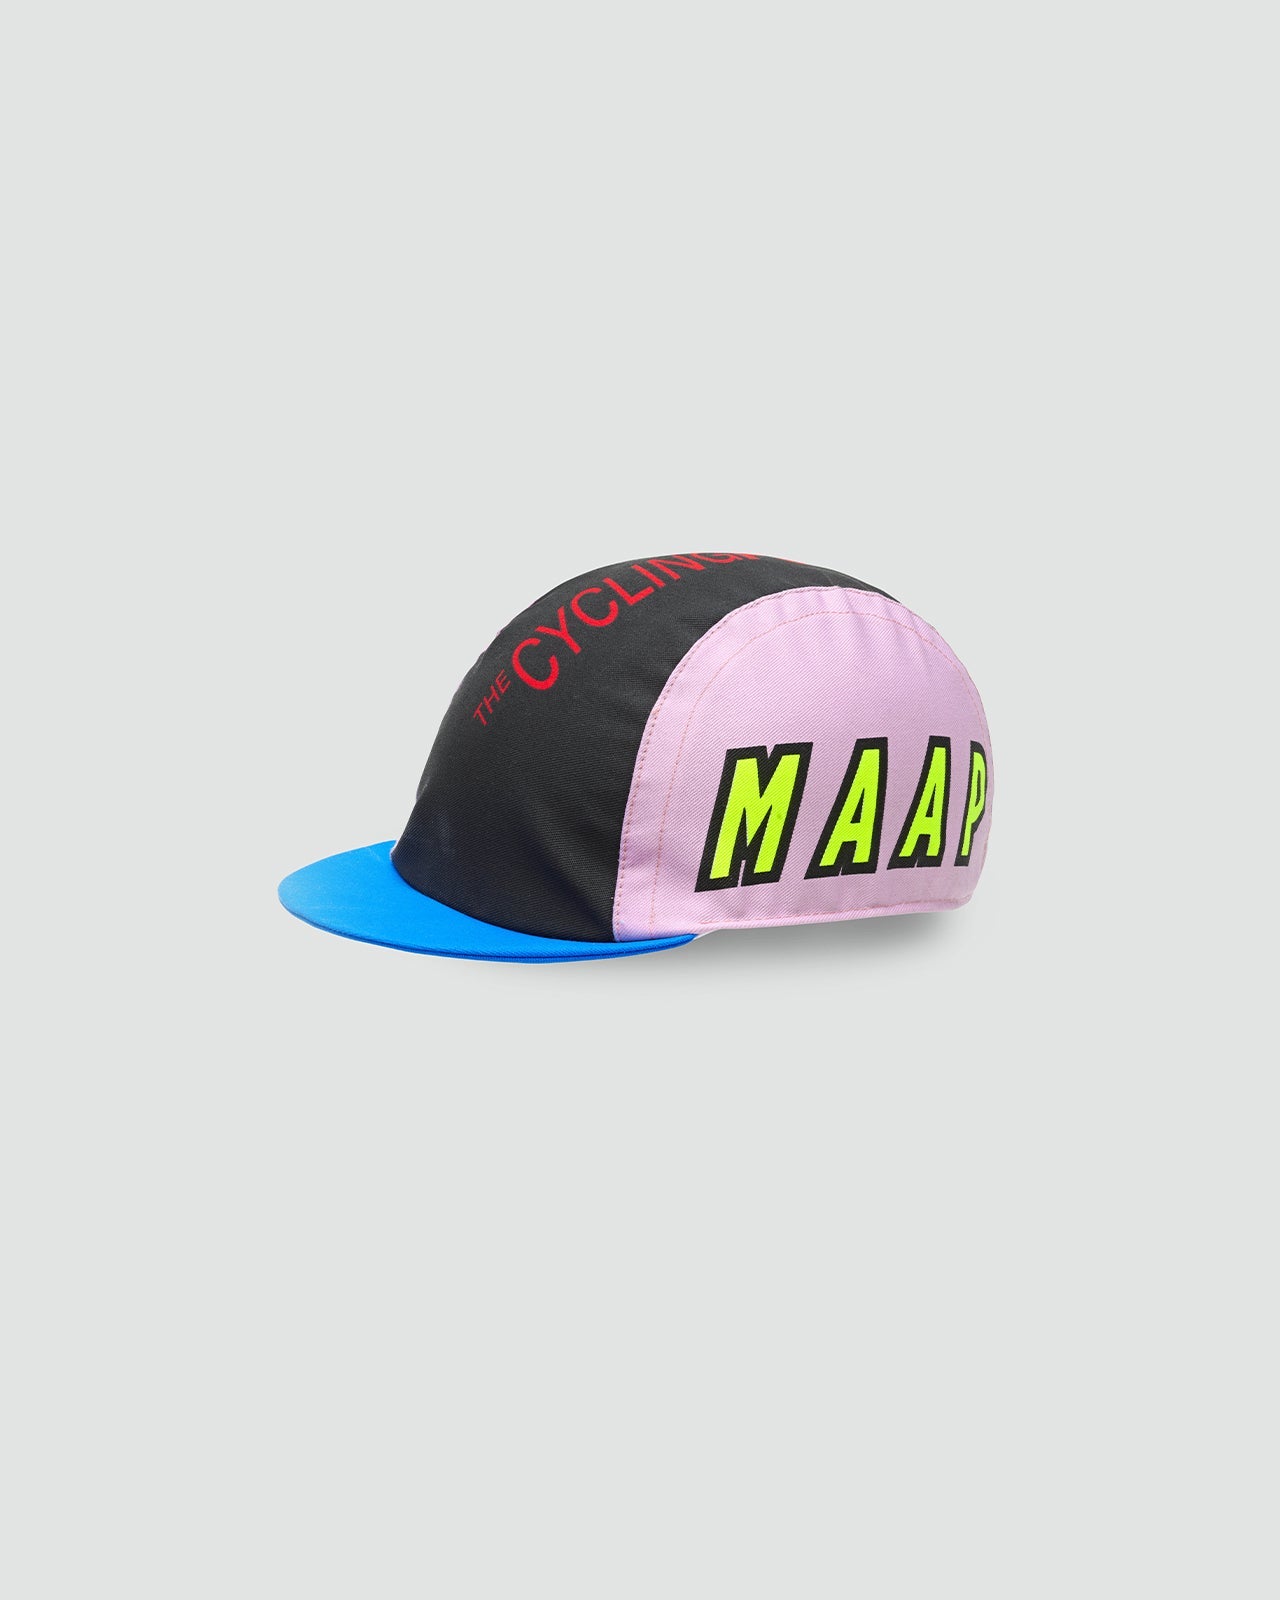 MAAP x The Cycling Podcast Cap